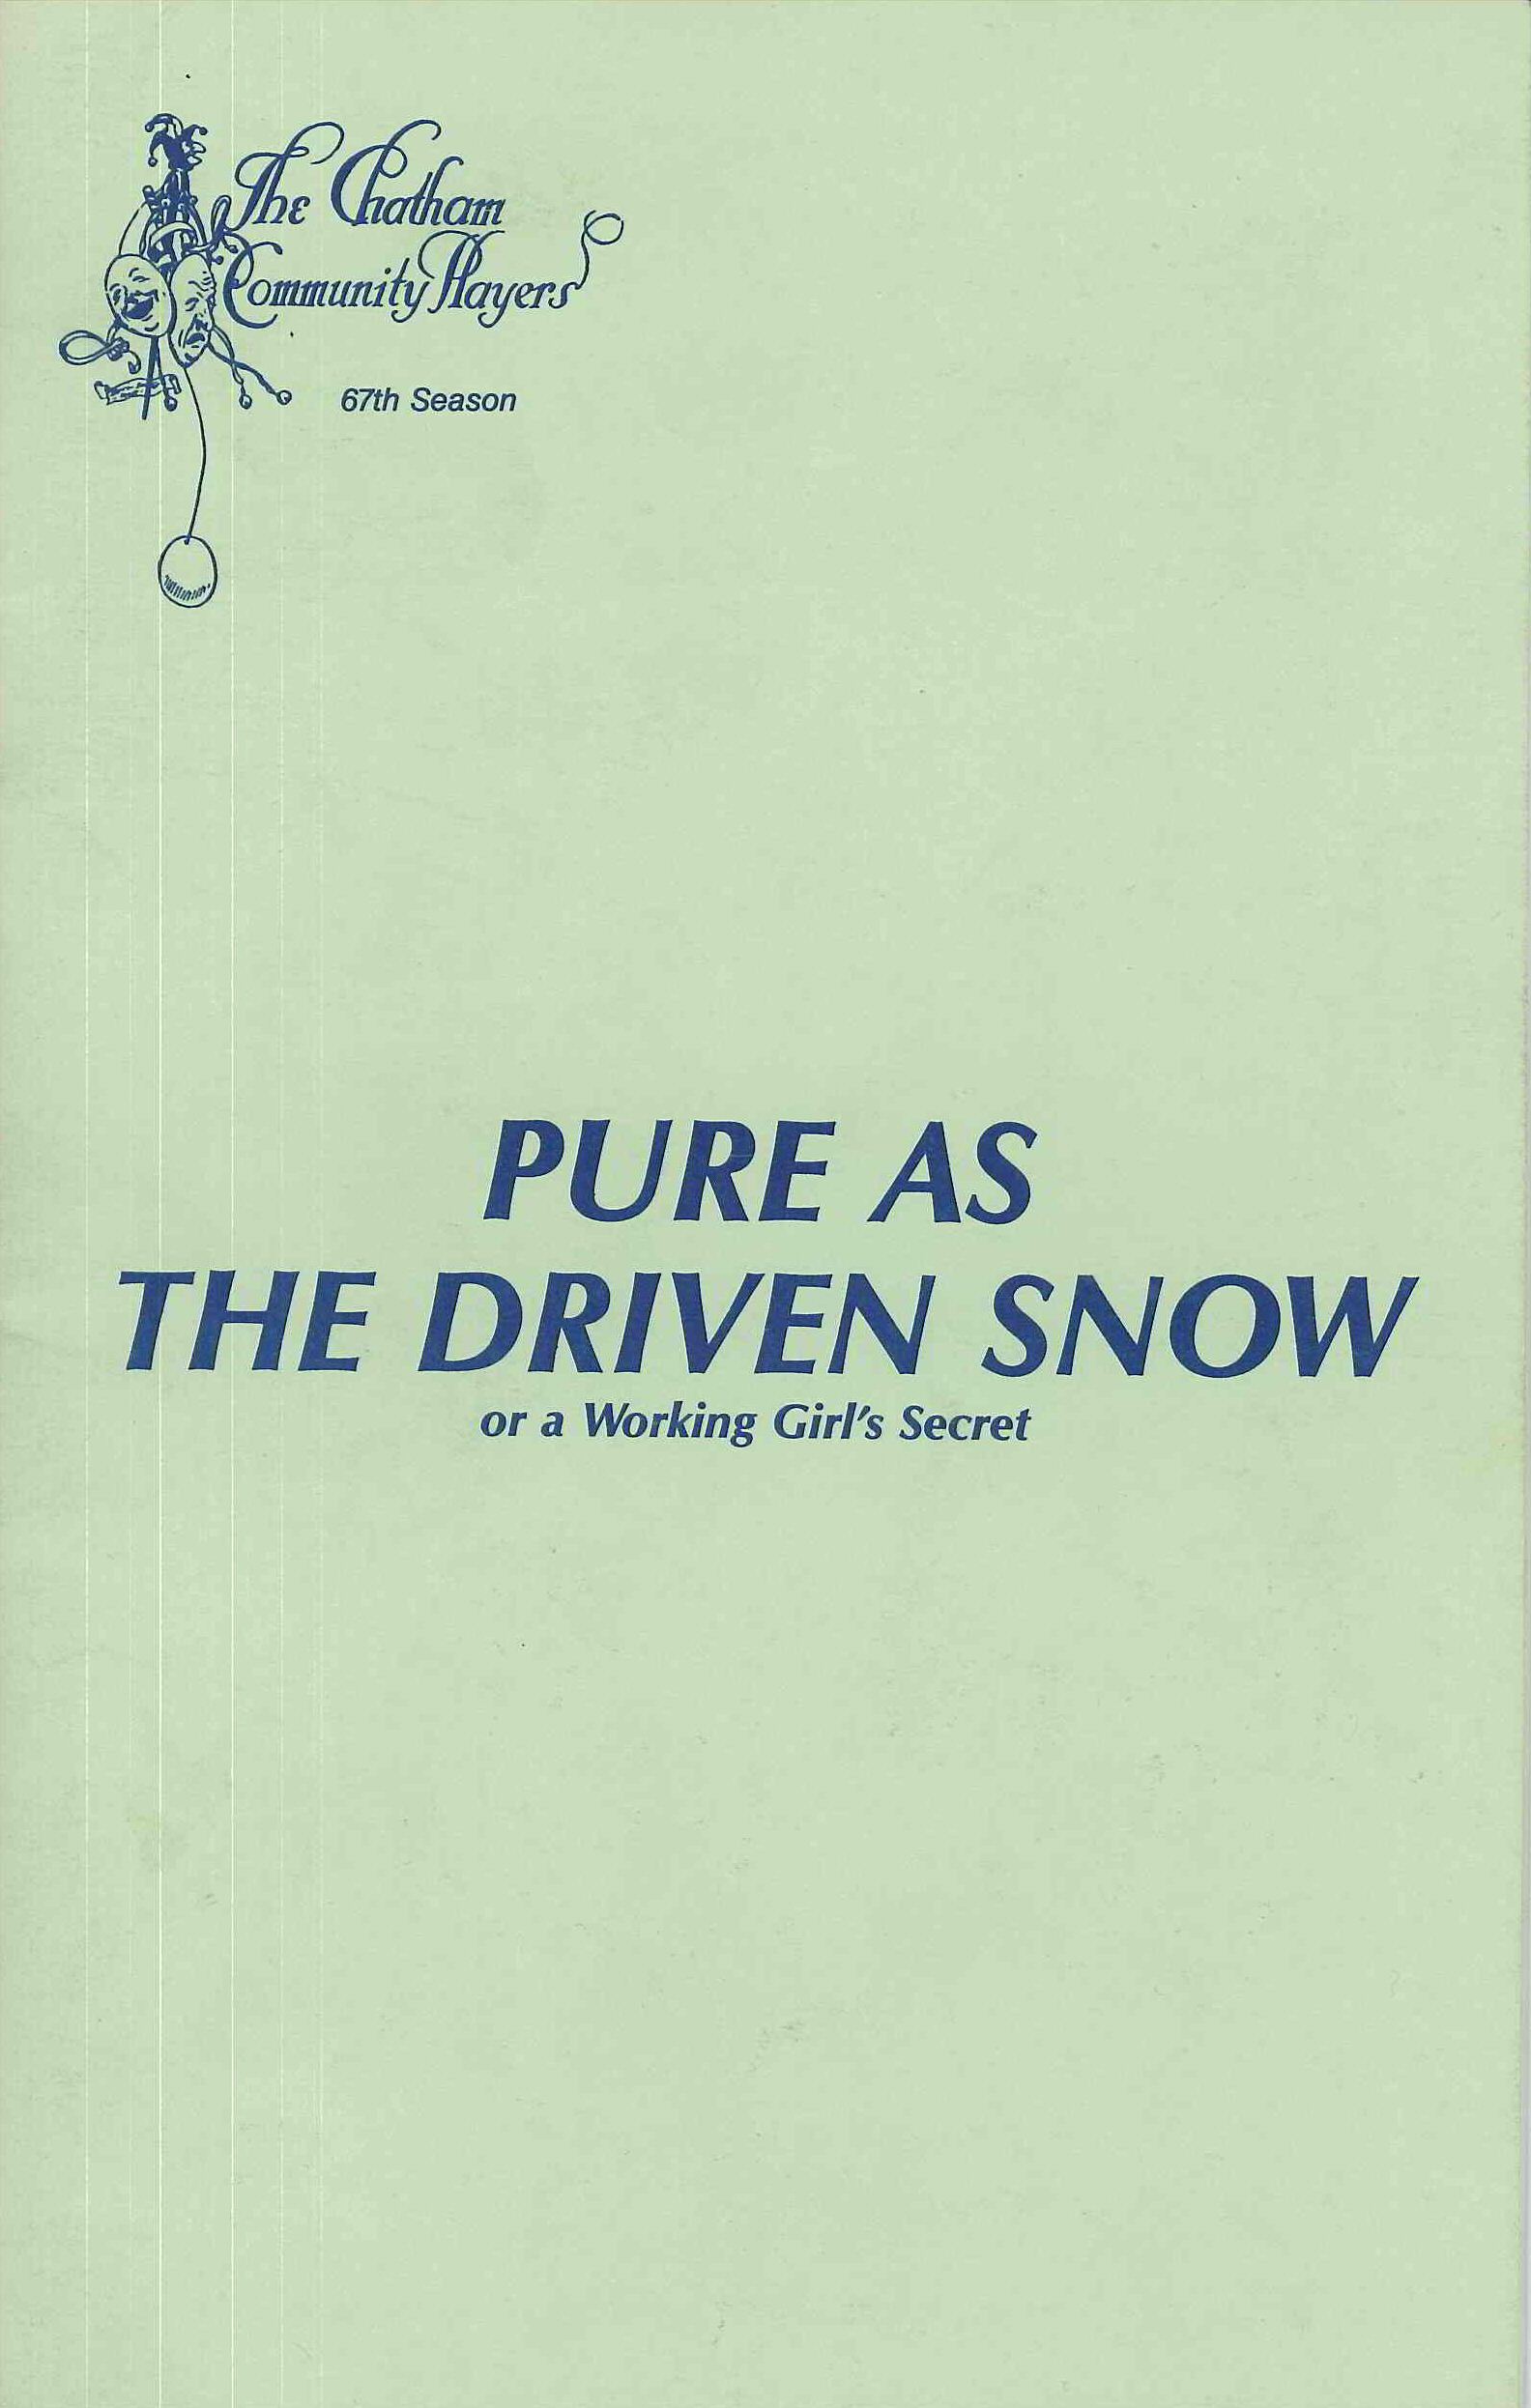 Pure As The Driven Snow (1988)